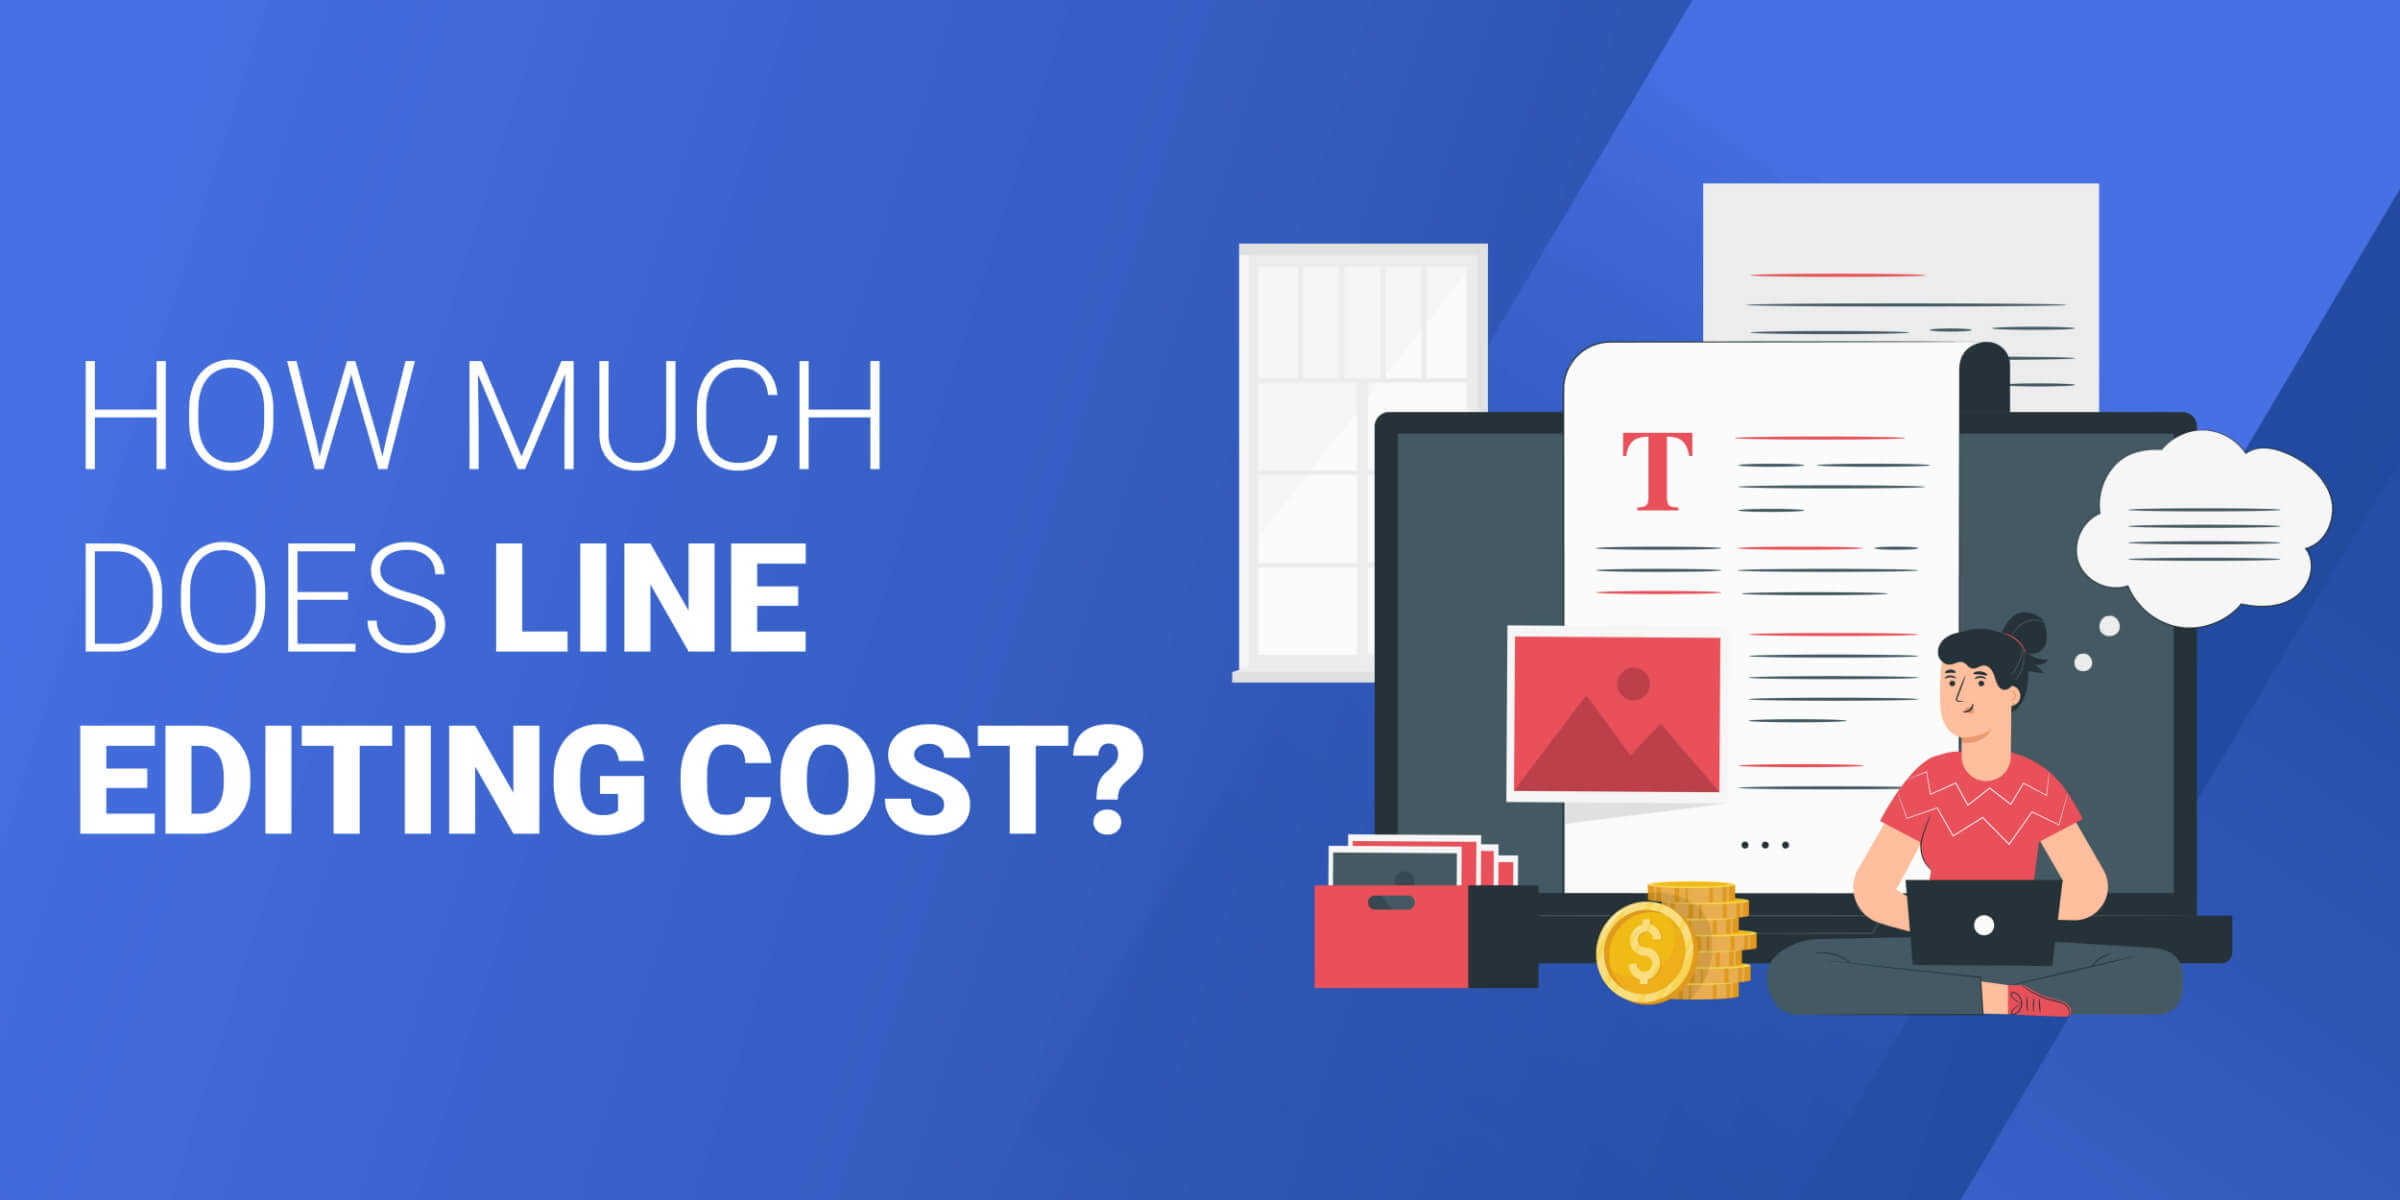 How Much Does Line Editing Cost